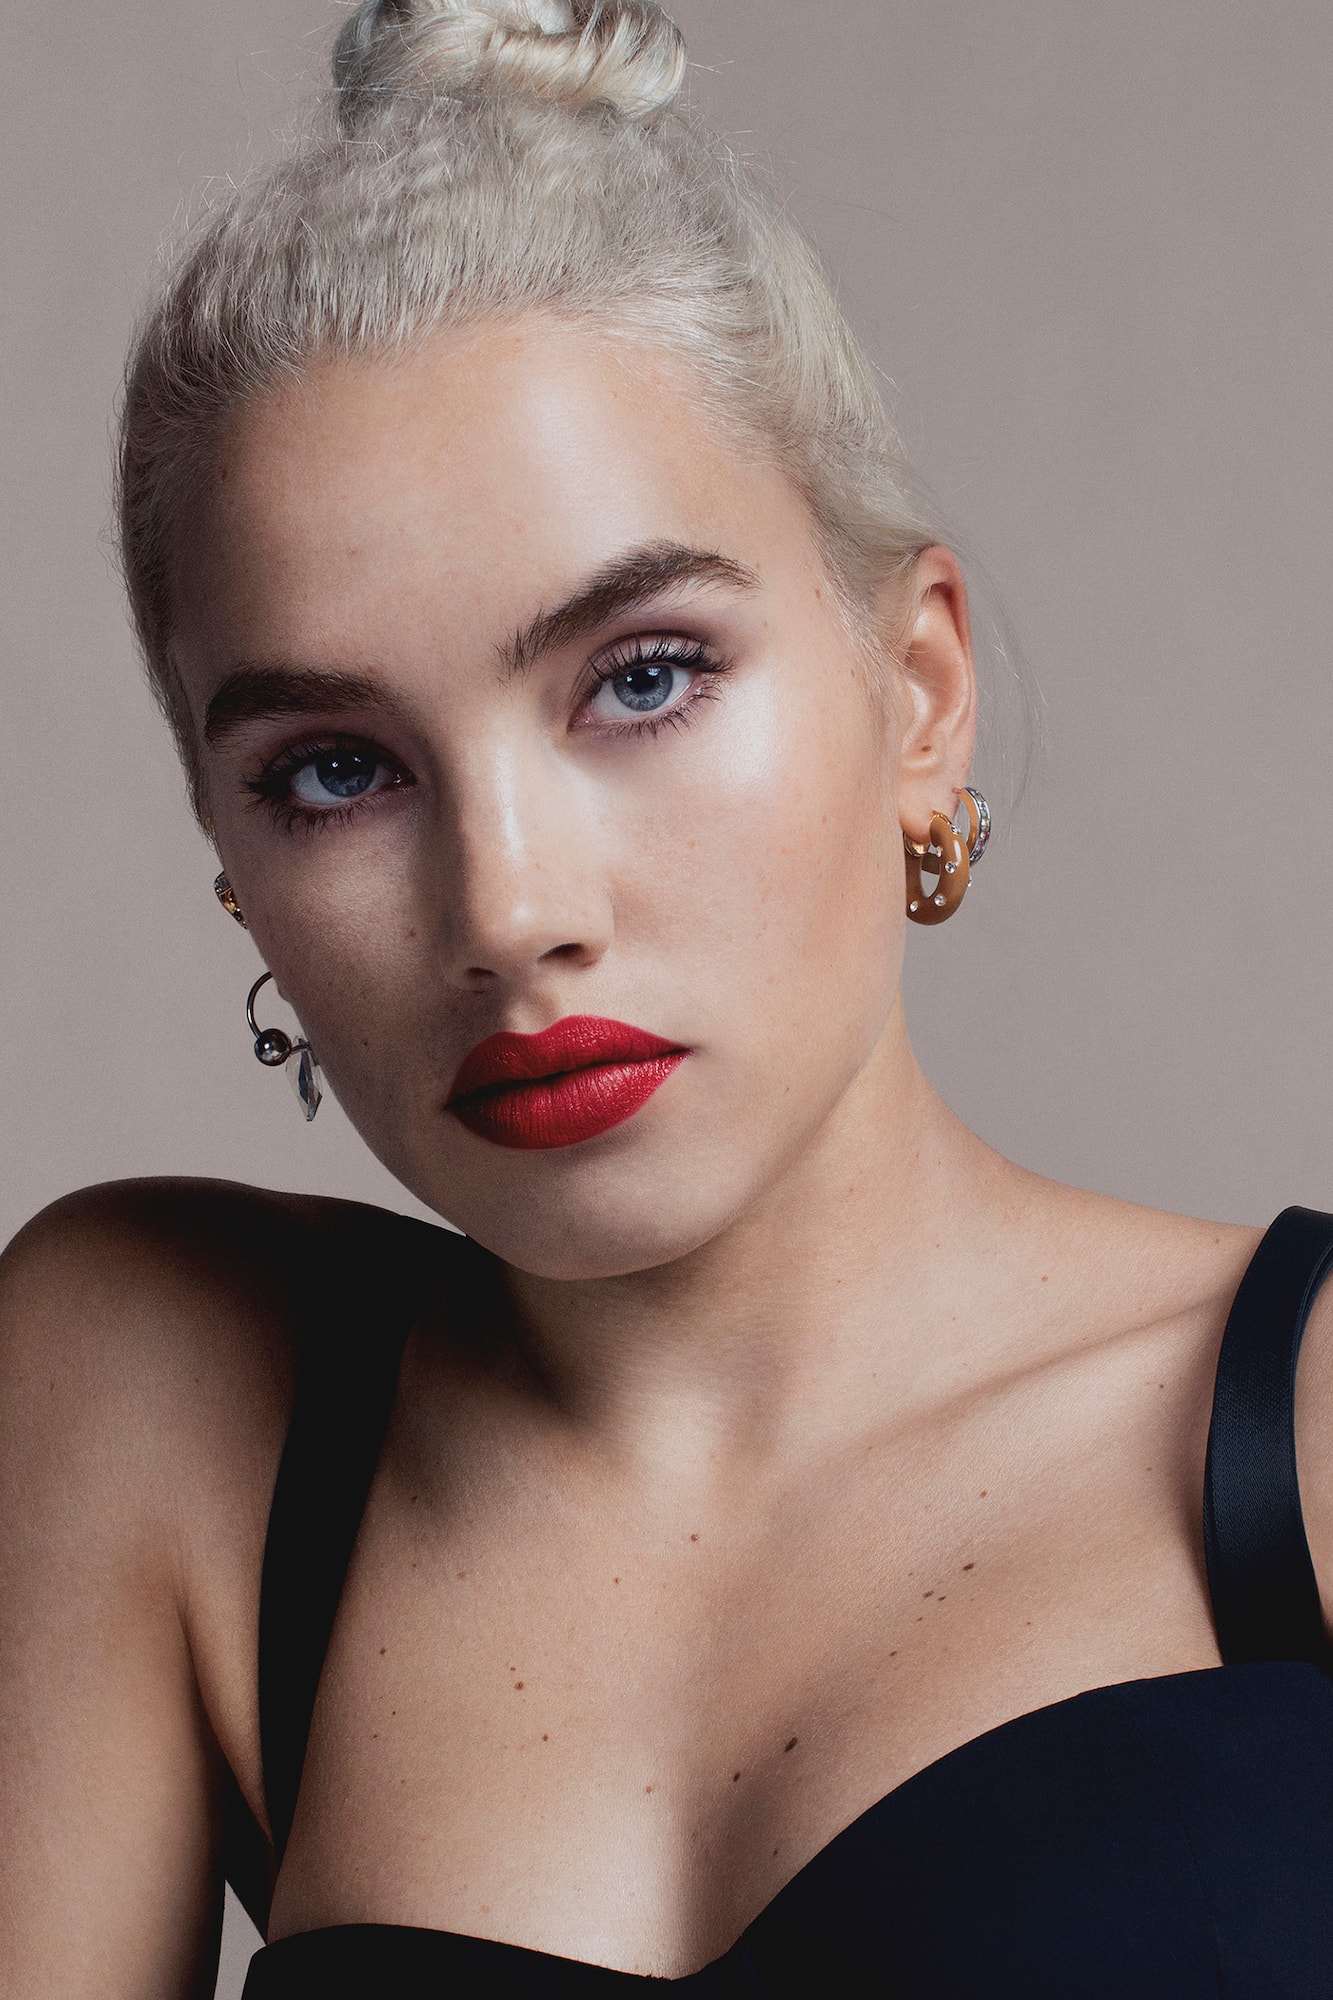 Burberry Beauty Isamaya Ffrench Interview